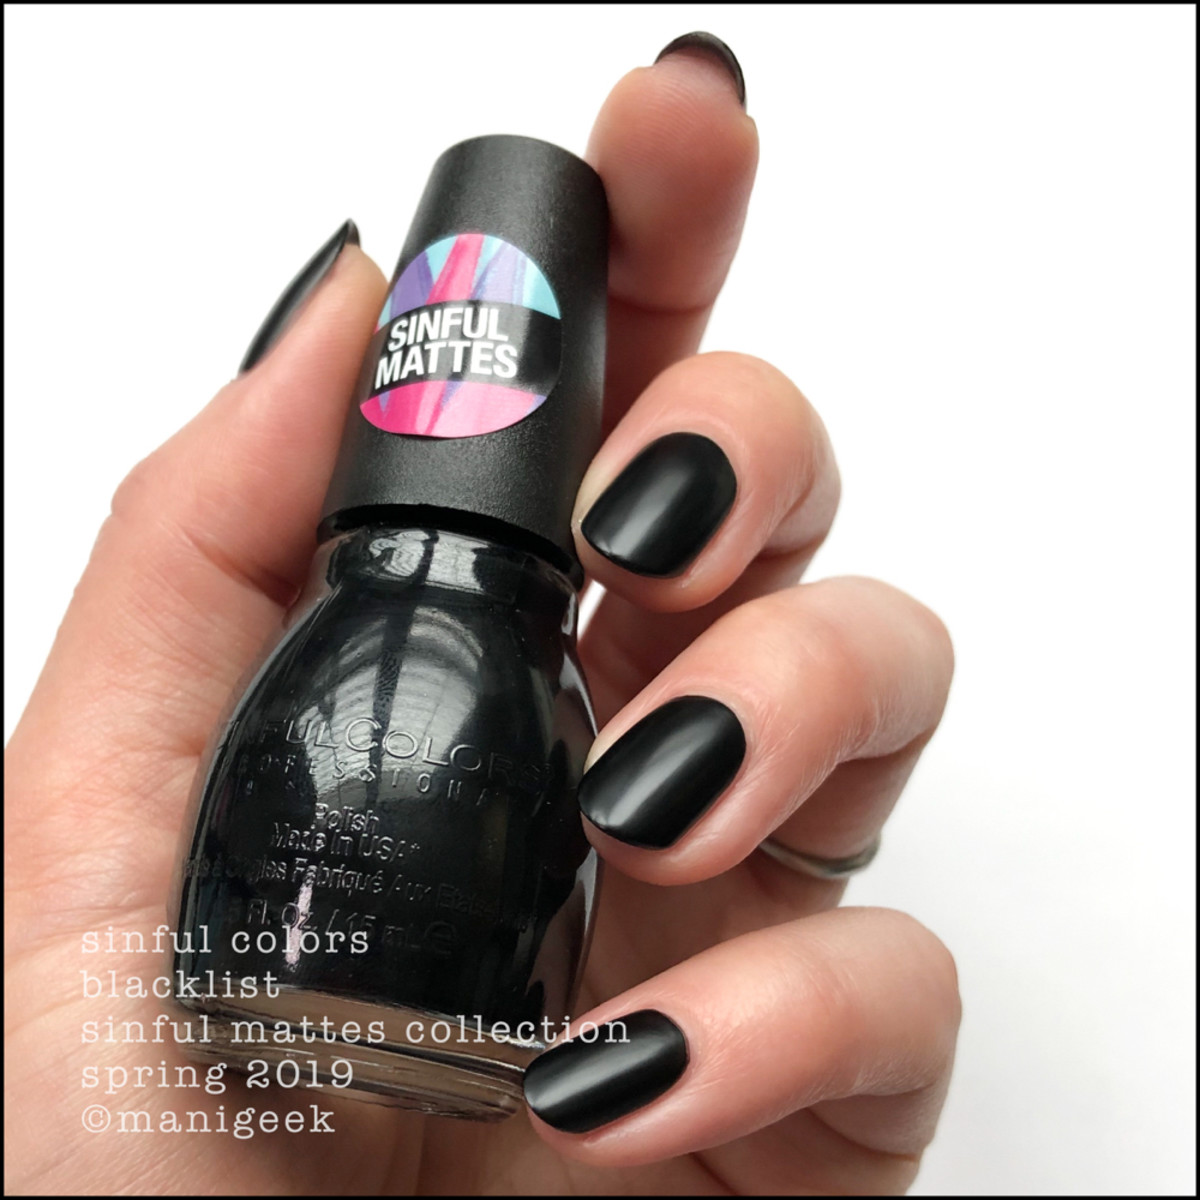 Sinful Colors Blacklist _ Sinful Colors Swatches Matte Collection 2019